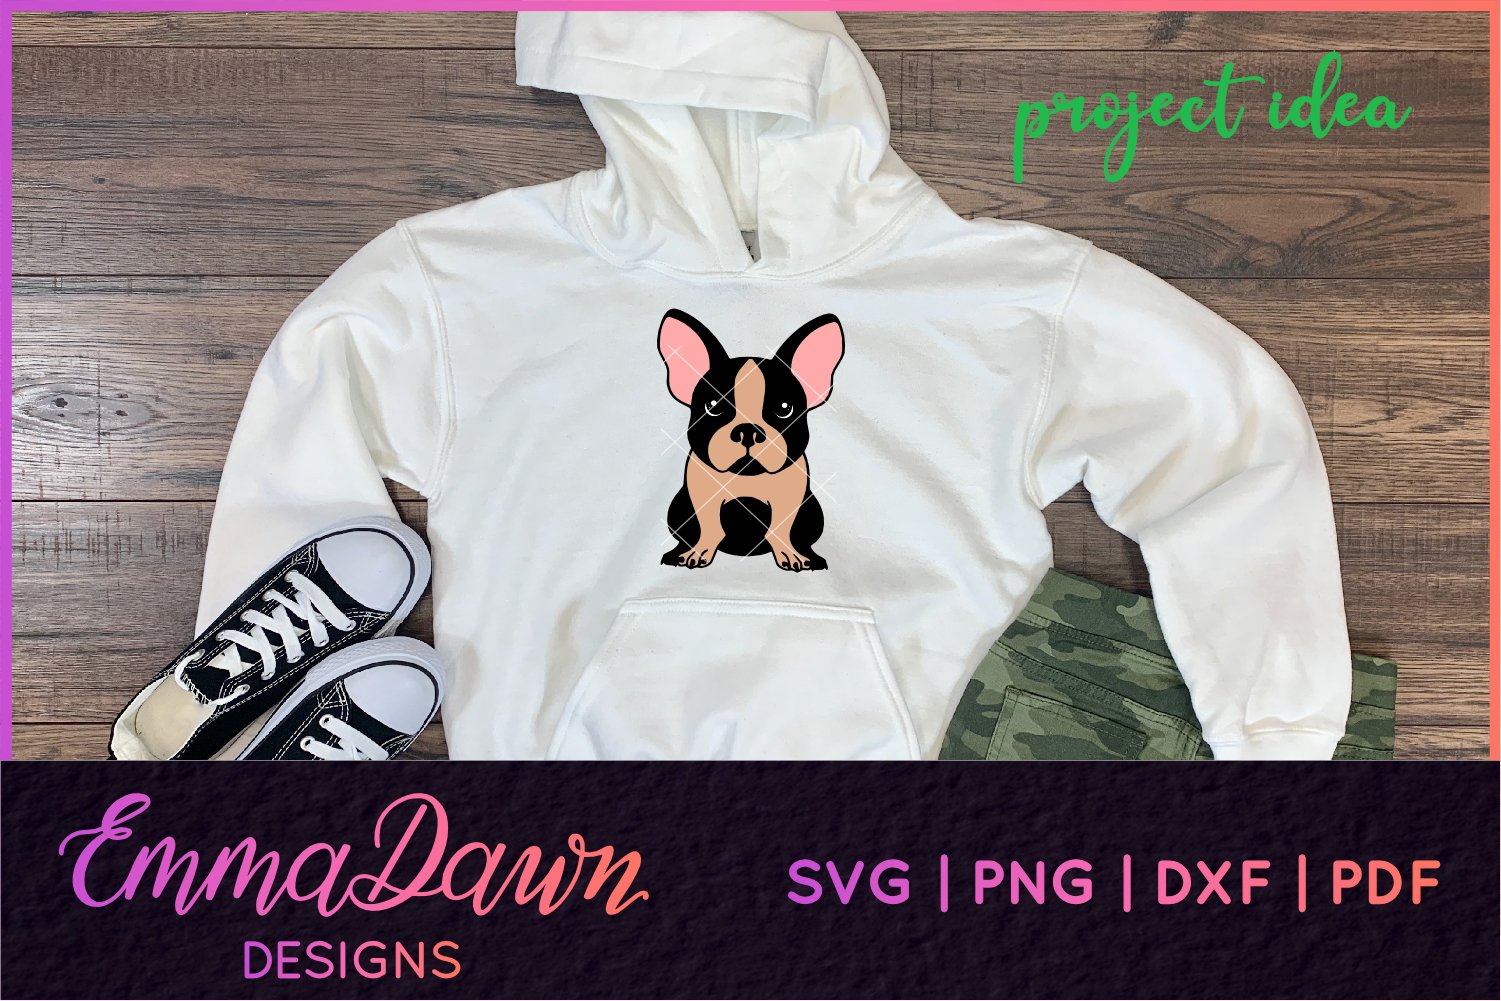 White hoodie with a black and tan dog on it.